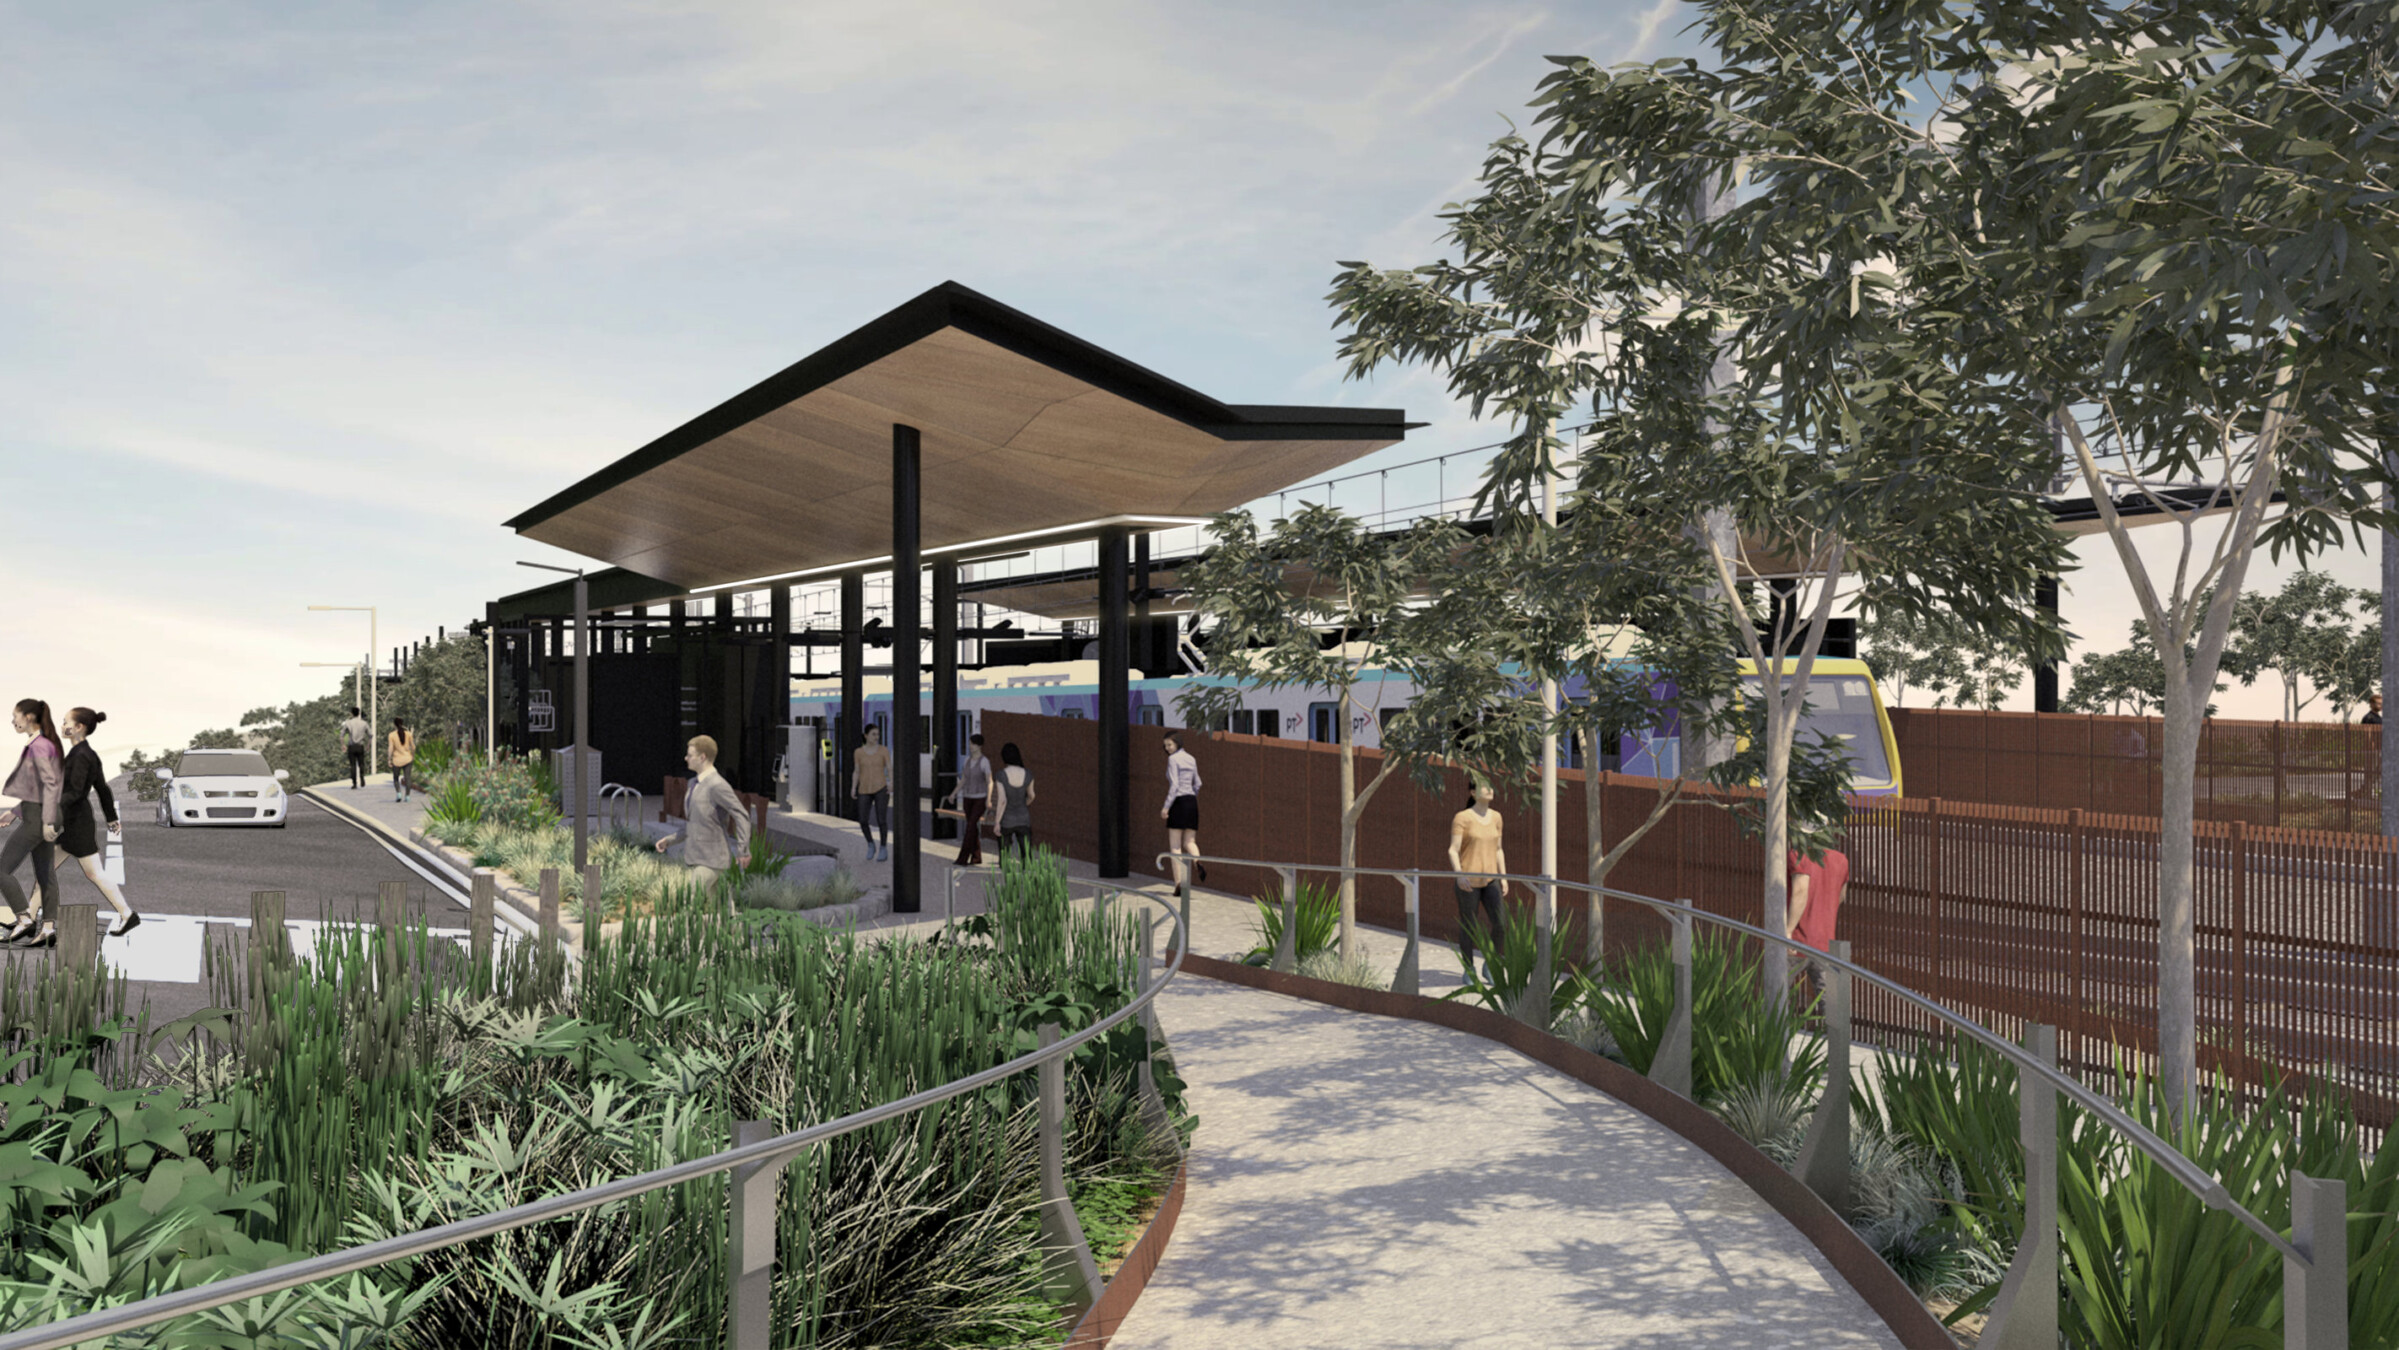 Genton to Lead Design for Greensborough and Montmorency Stations